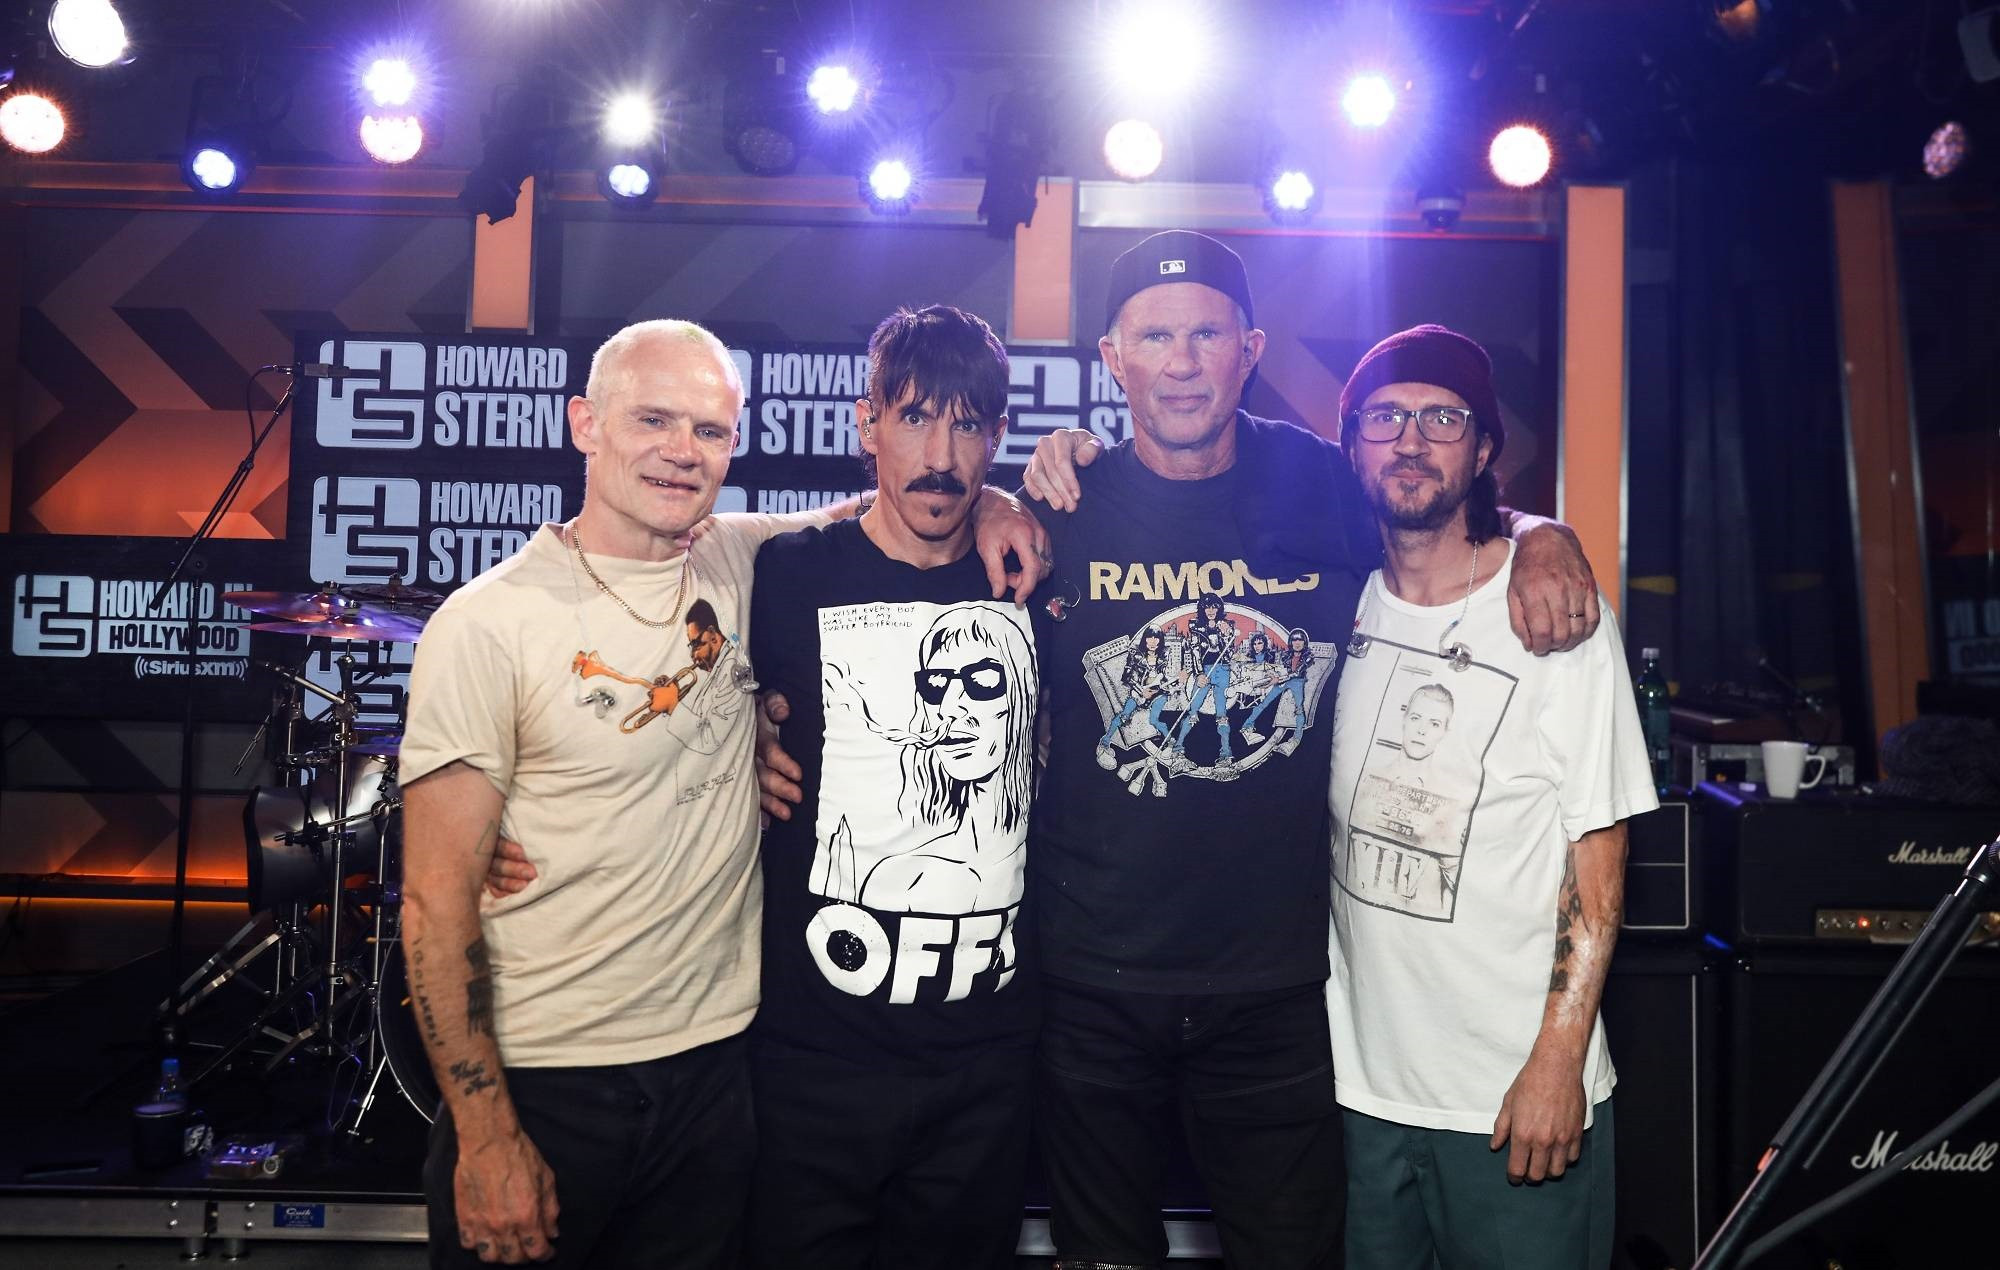 Album Baru, Red Hot Chili Peppers Usung "Return Of The Dream Canteen"